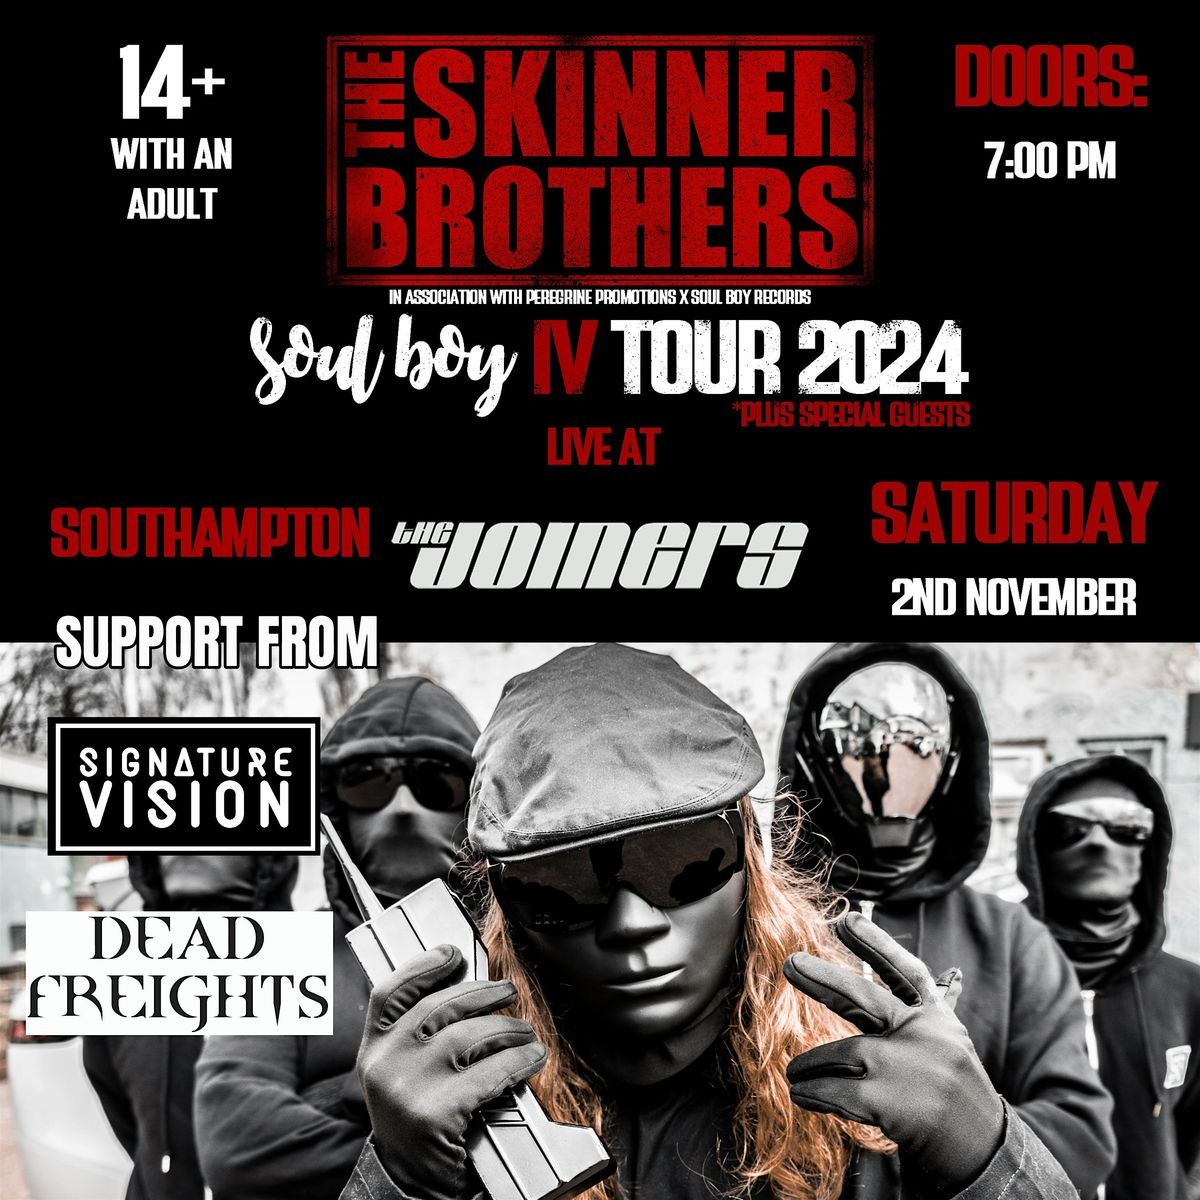 The Skinner Brothers live @ Southampton Joiners Arms